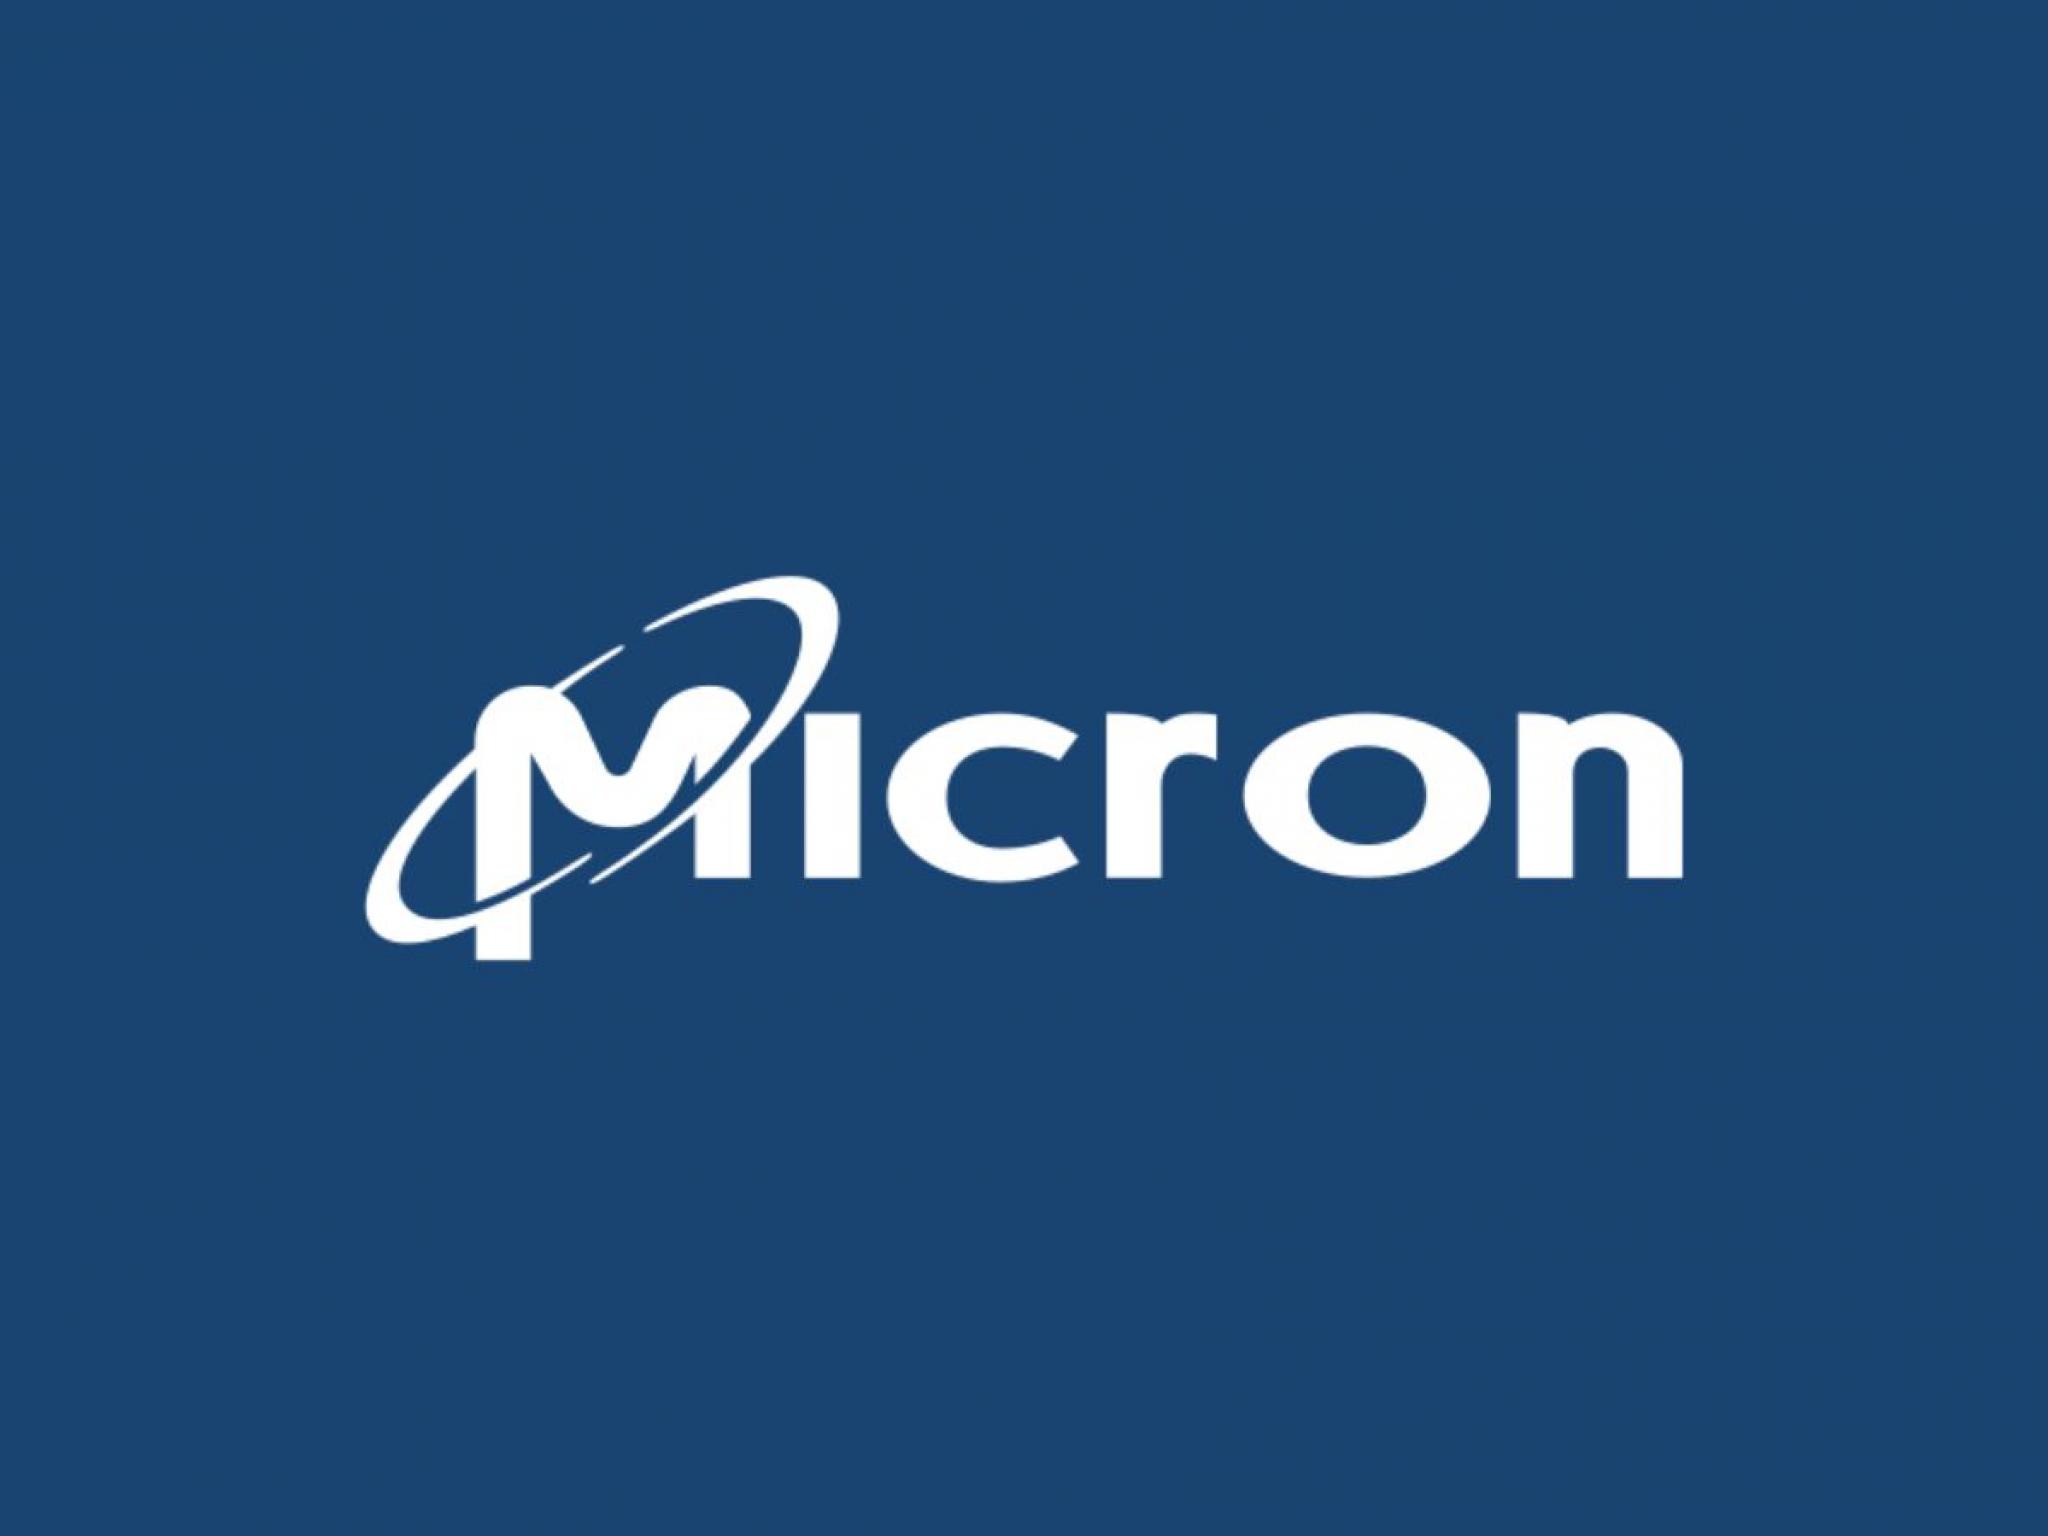  micron-dropbox-and-2-other-stocks-insiders-are-selling 